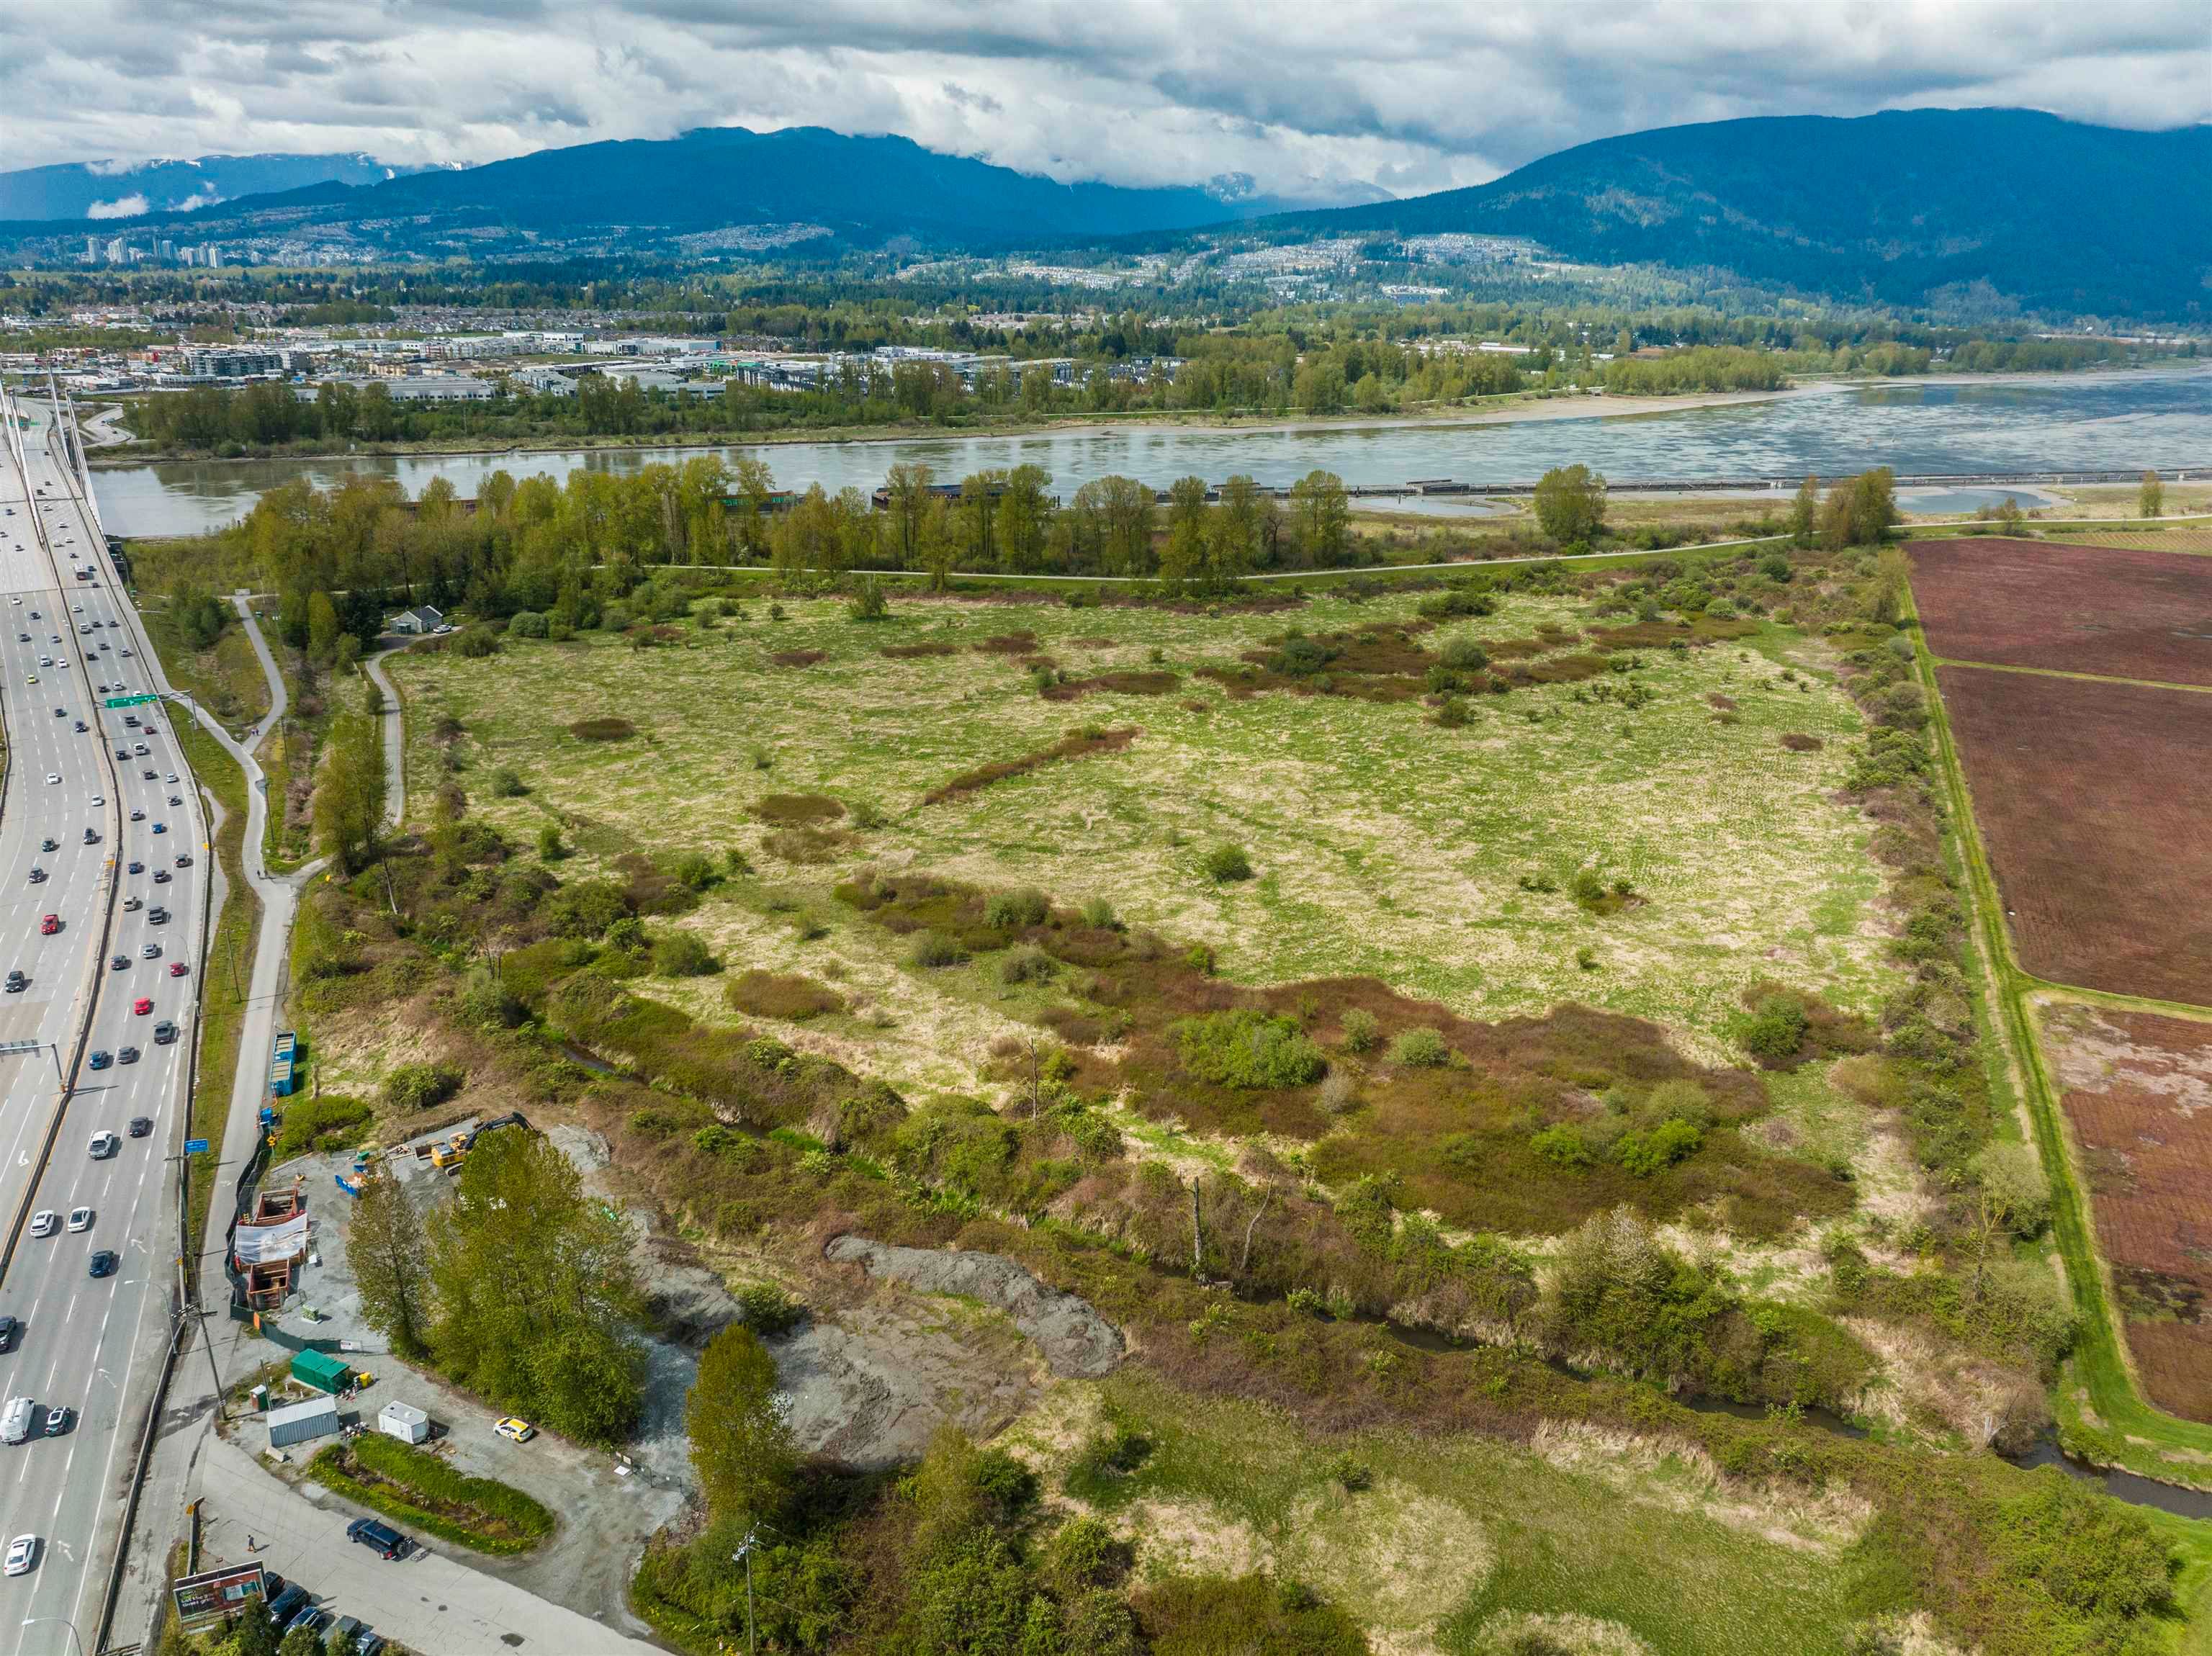 Main Photo: 17931 OLD DEWDNEY TRUNK Road in Pitt Meadows: North Meadows PI Agri-Business for sale : MLS®# C8050535